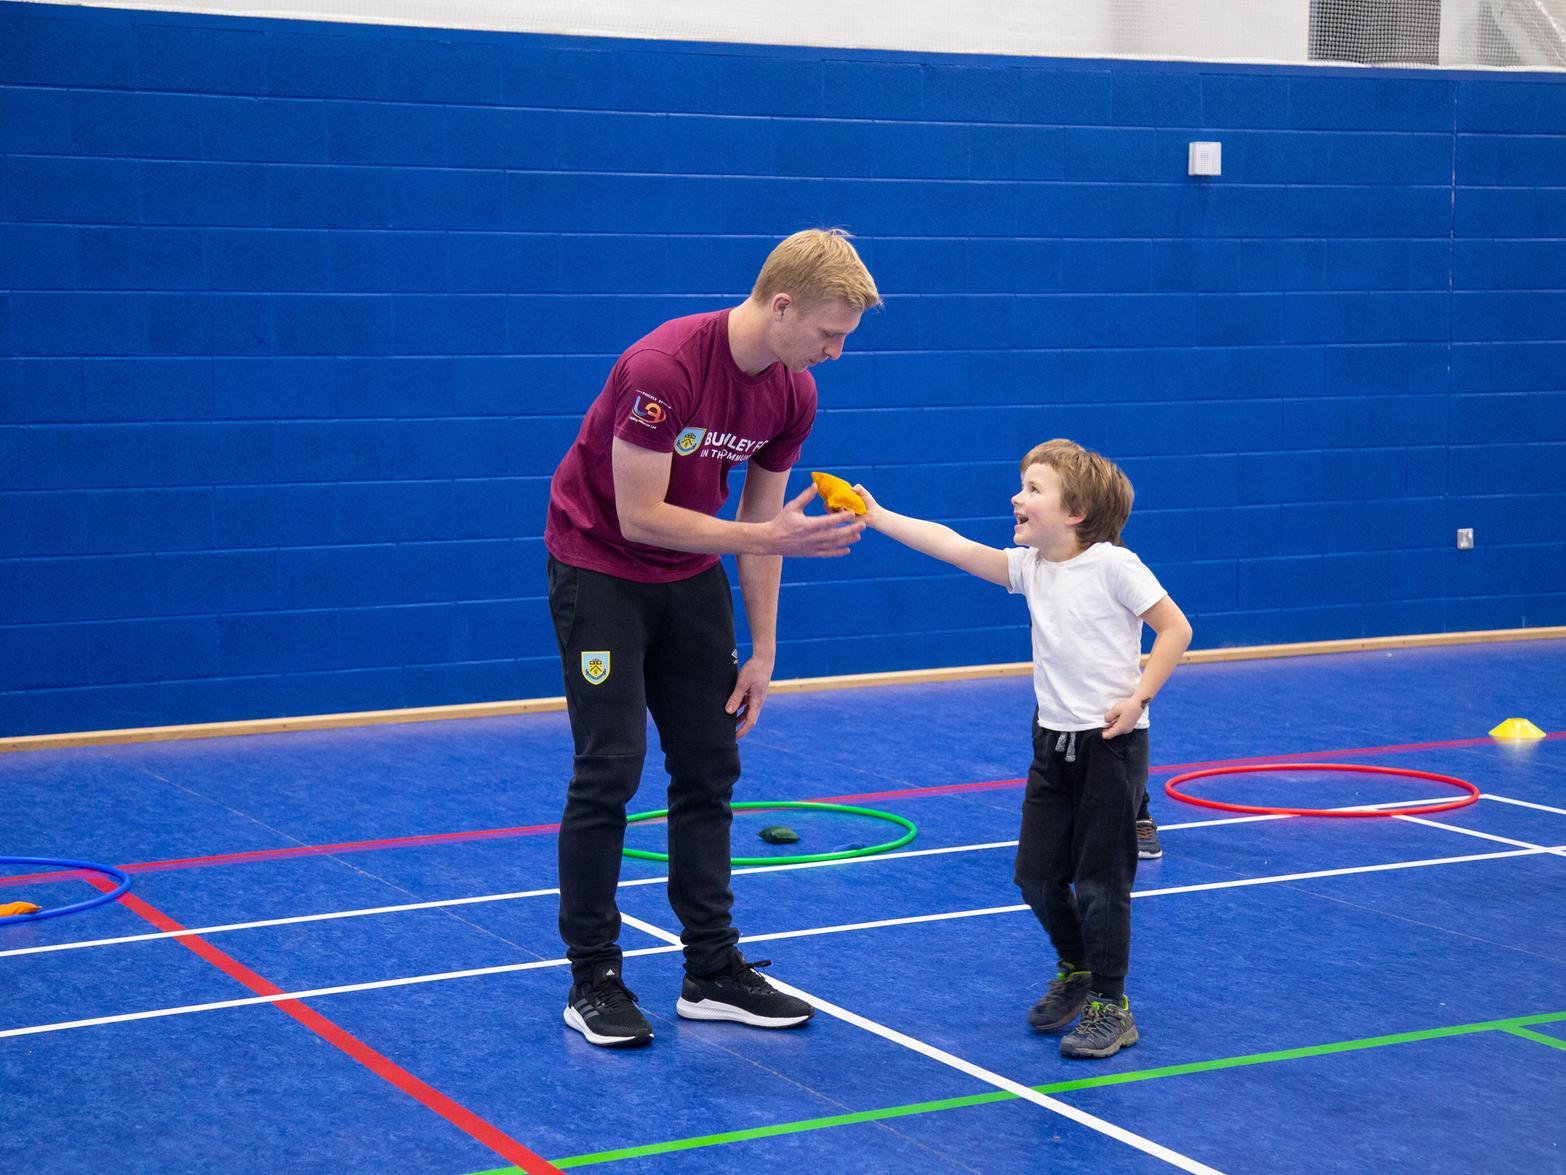 Ben Mee chats to this young fan